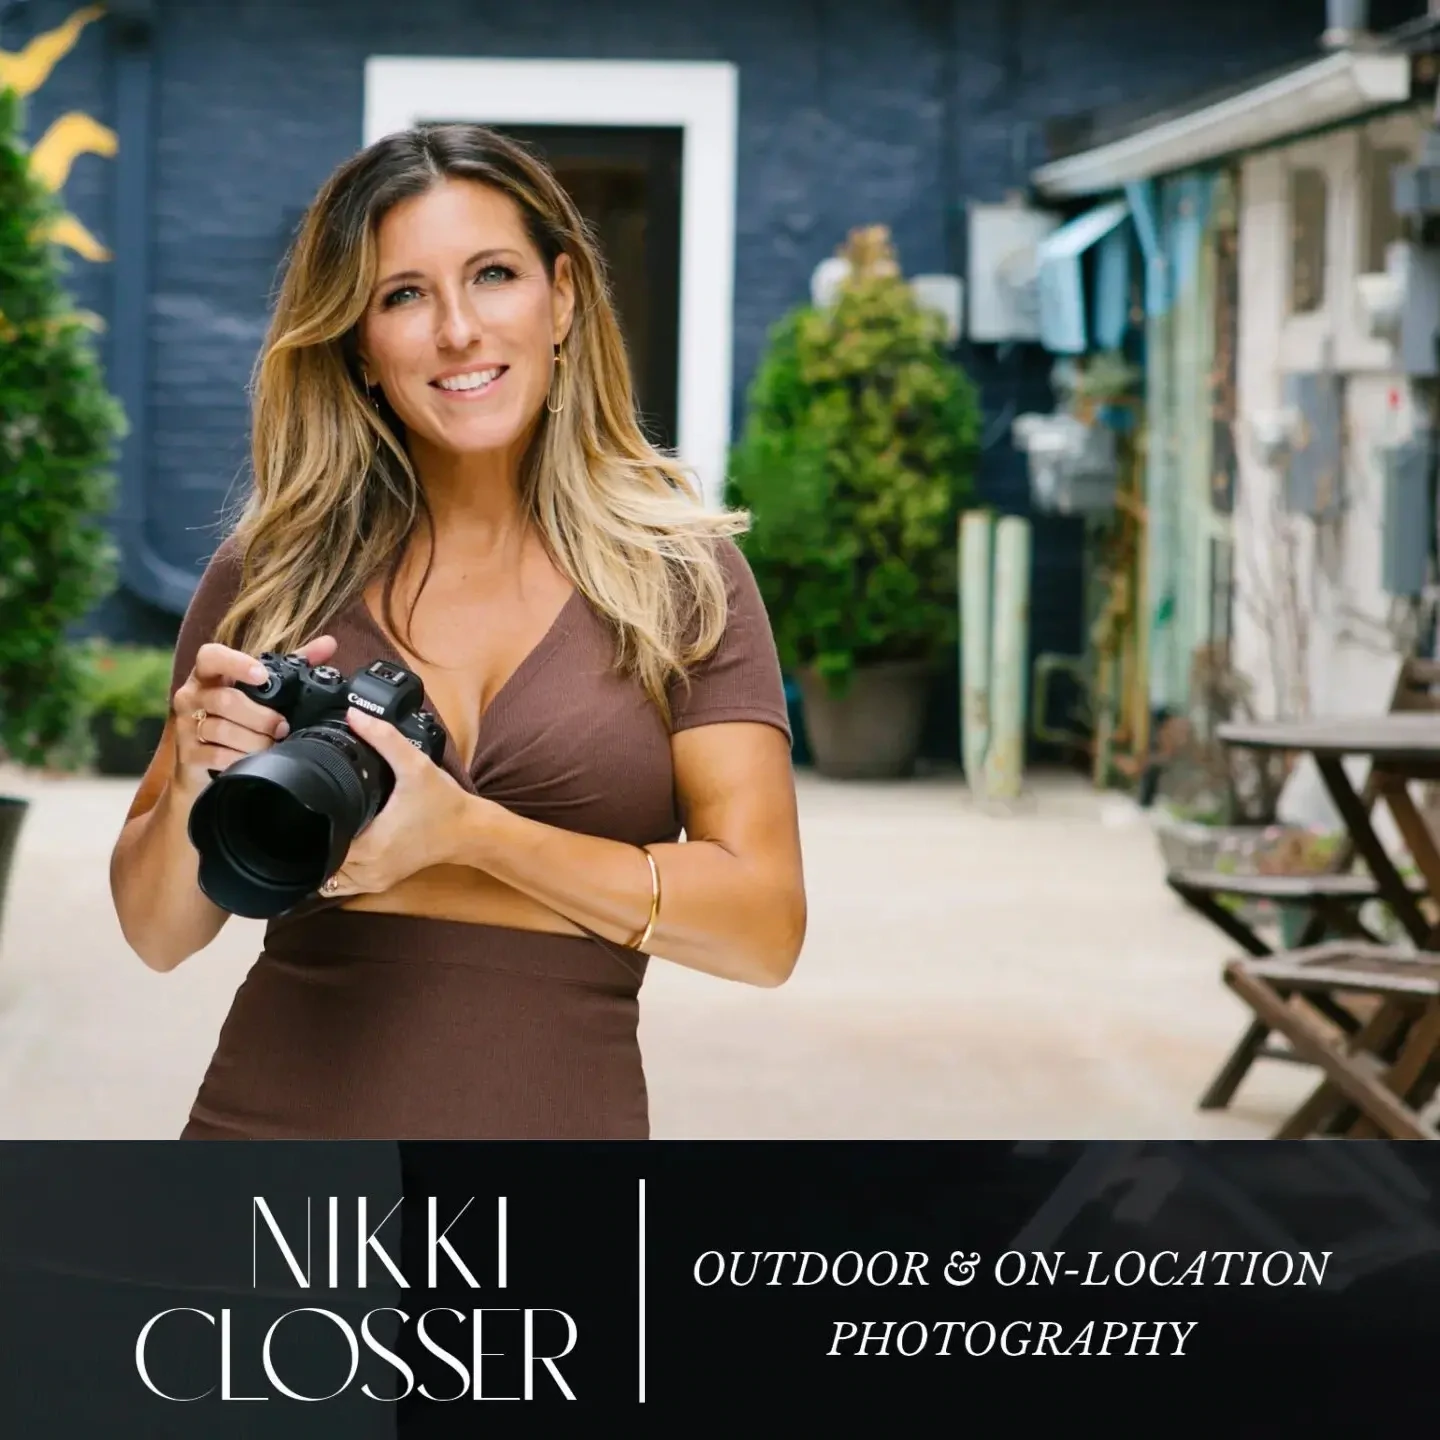 Outdoor and On-Location Photography by Nikki Closser